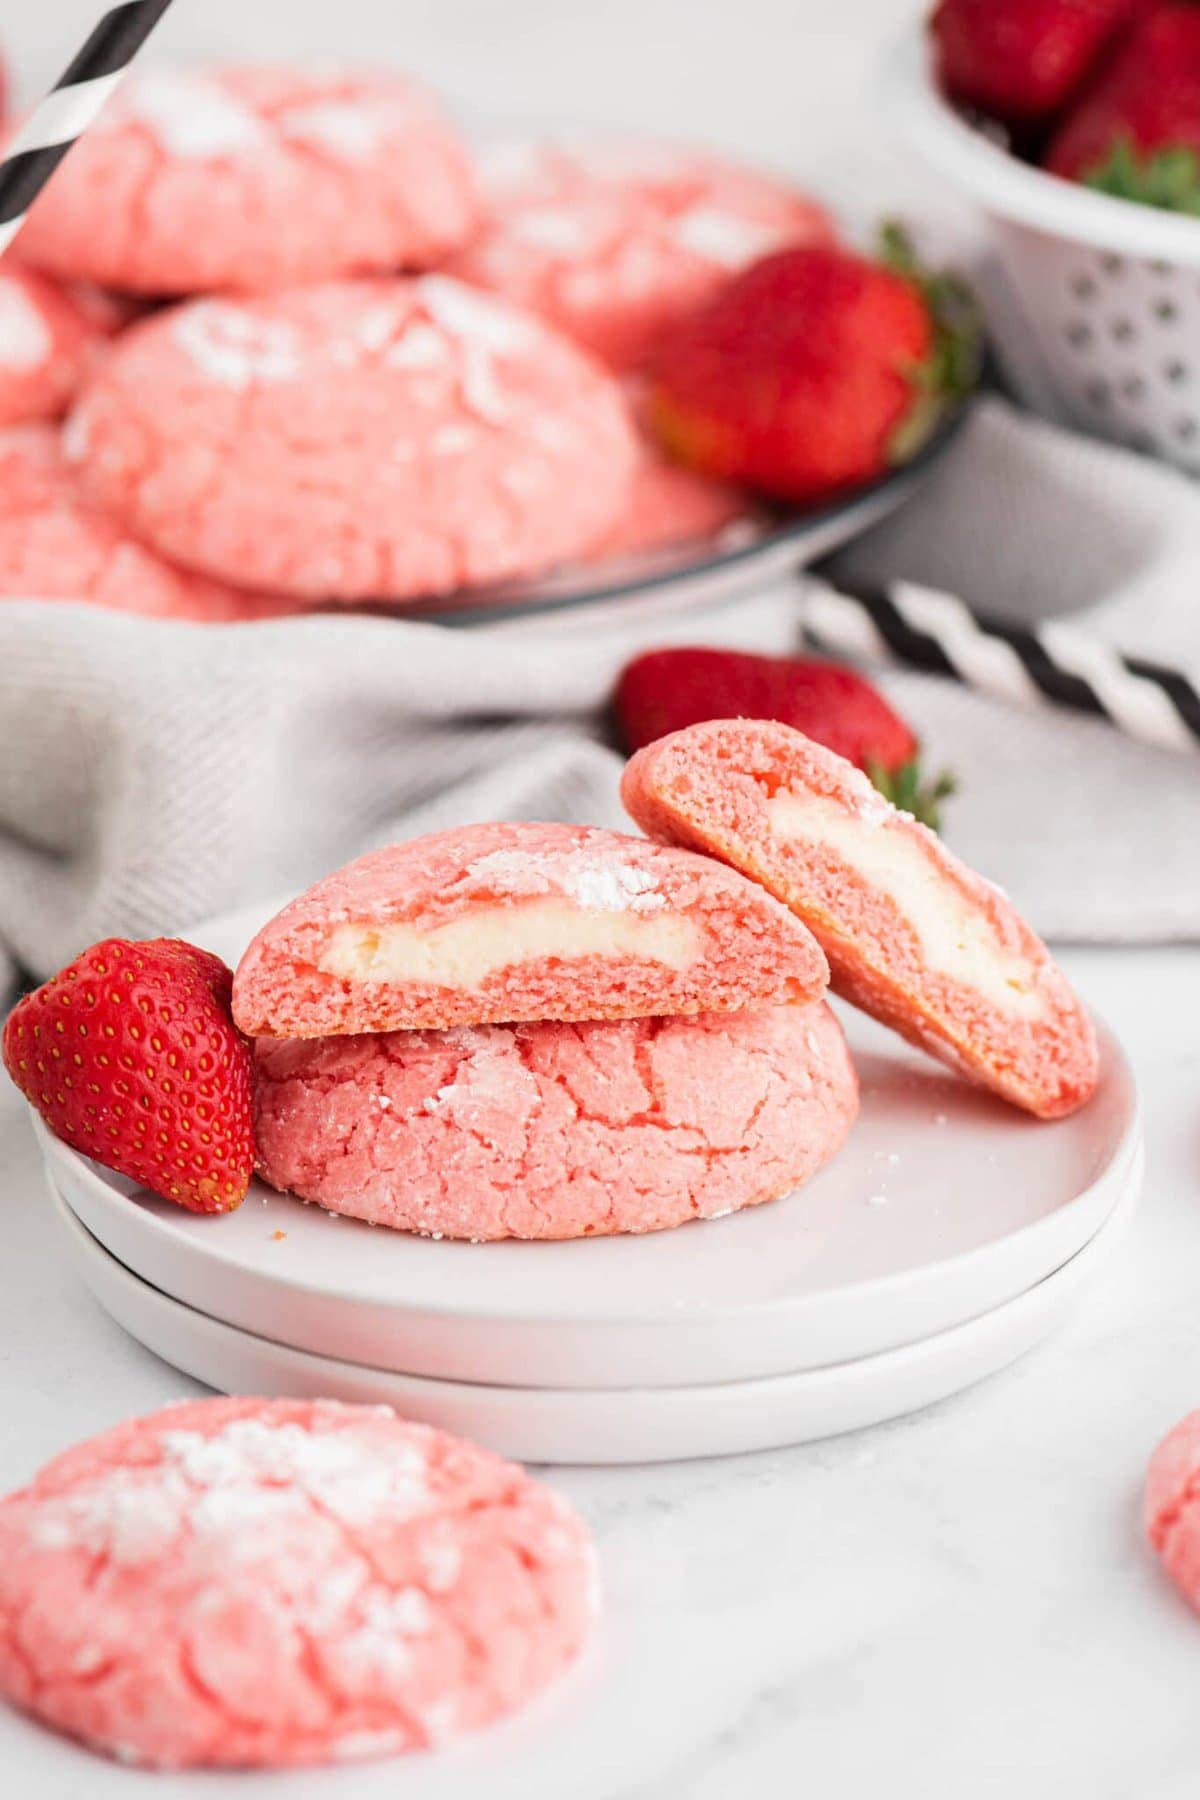 showing the inside of Strawberry Cheesecake Cookies